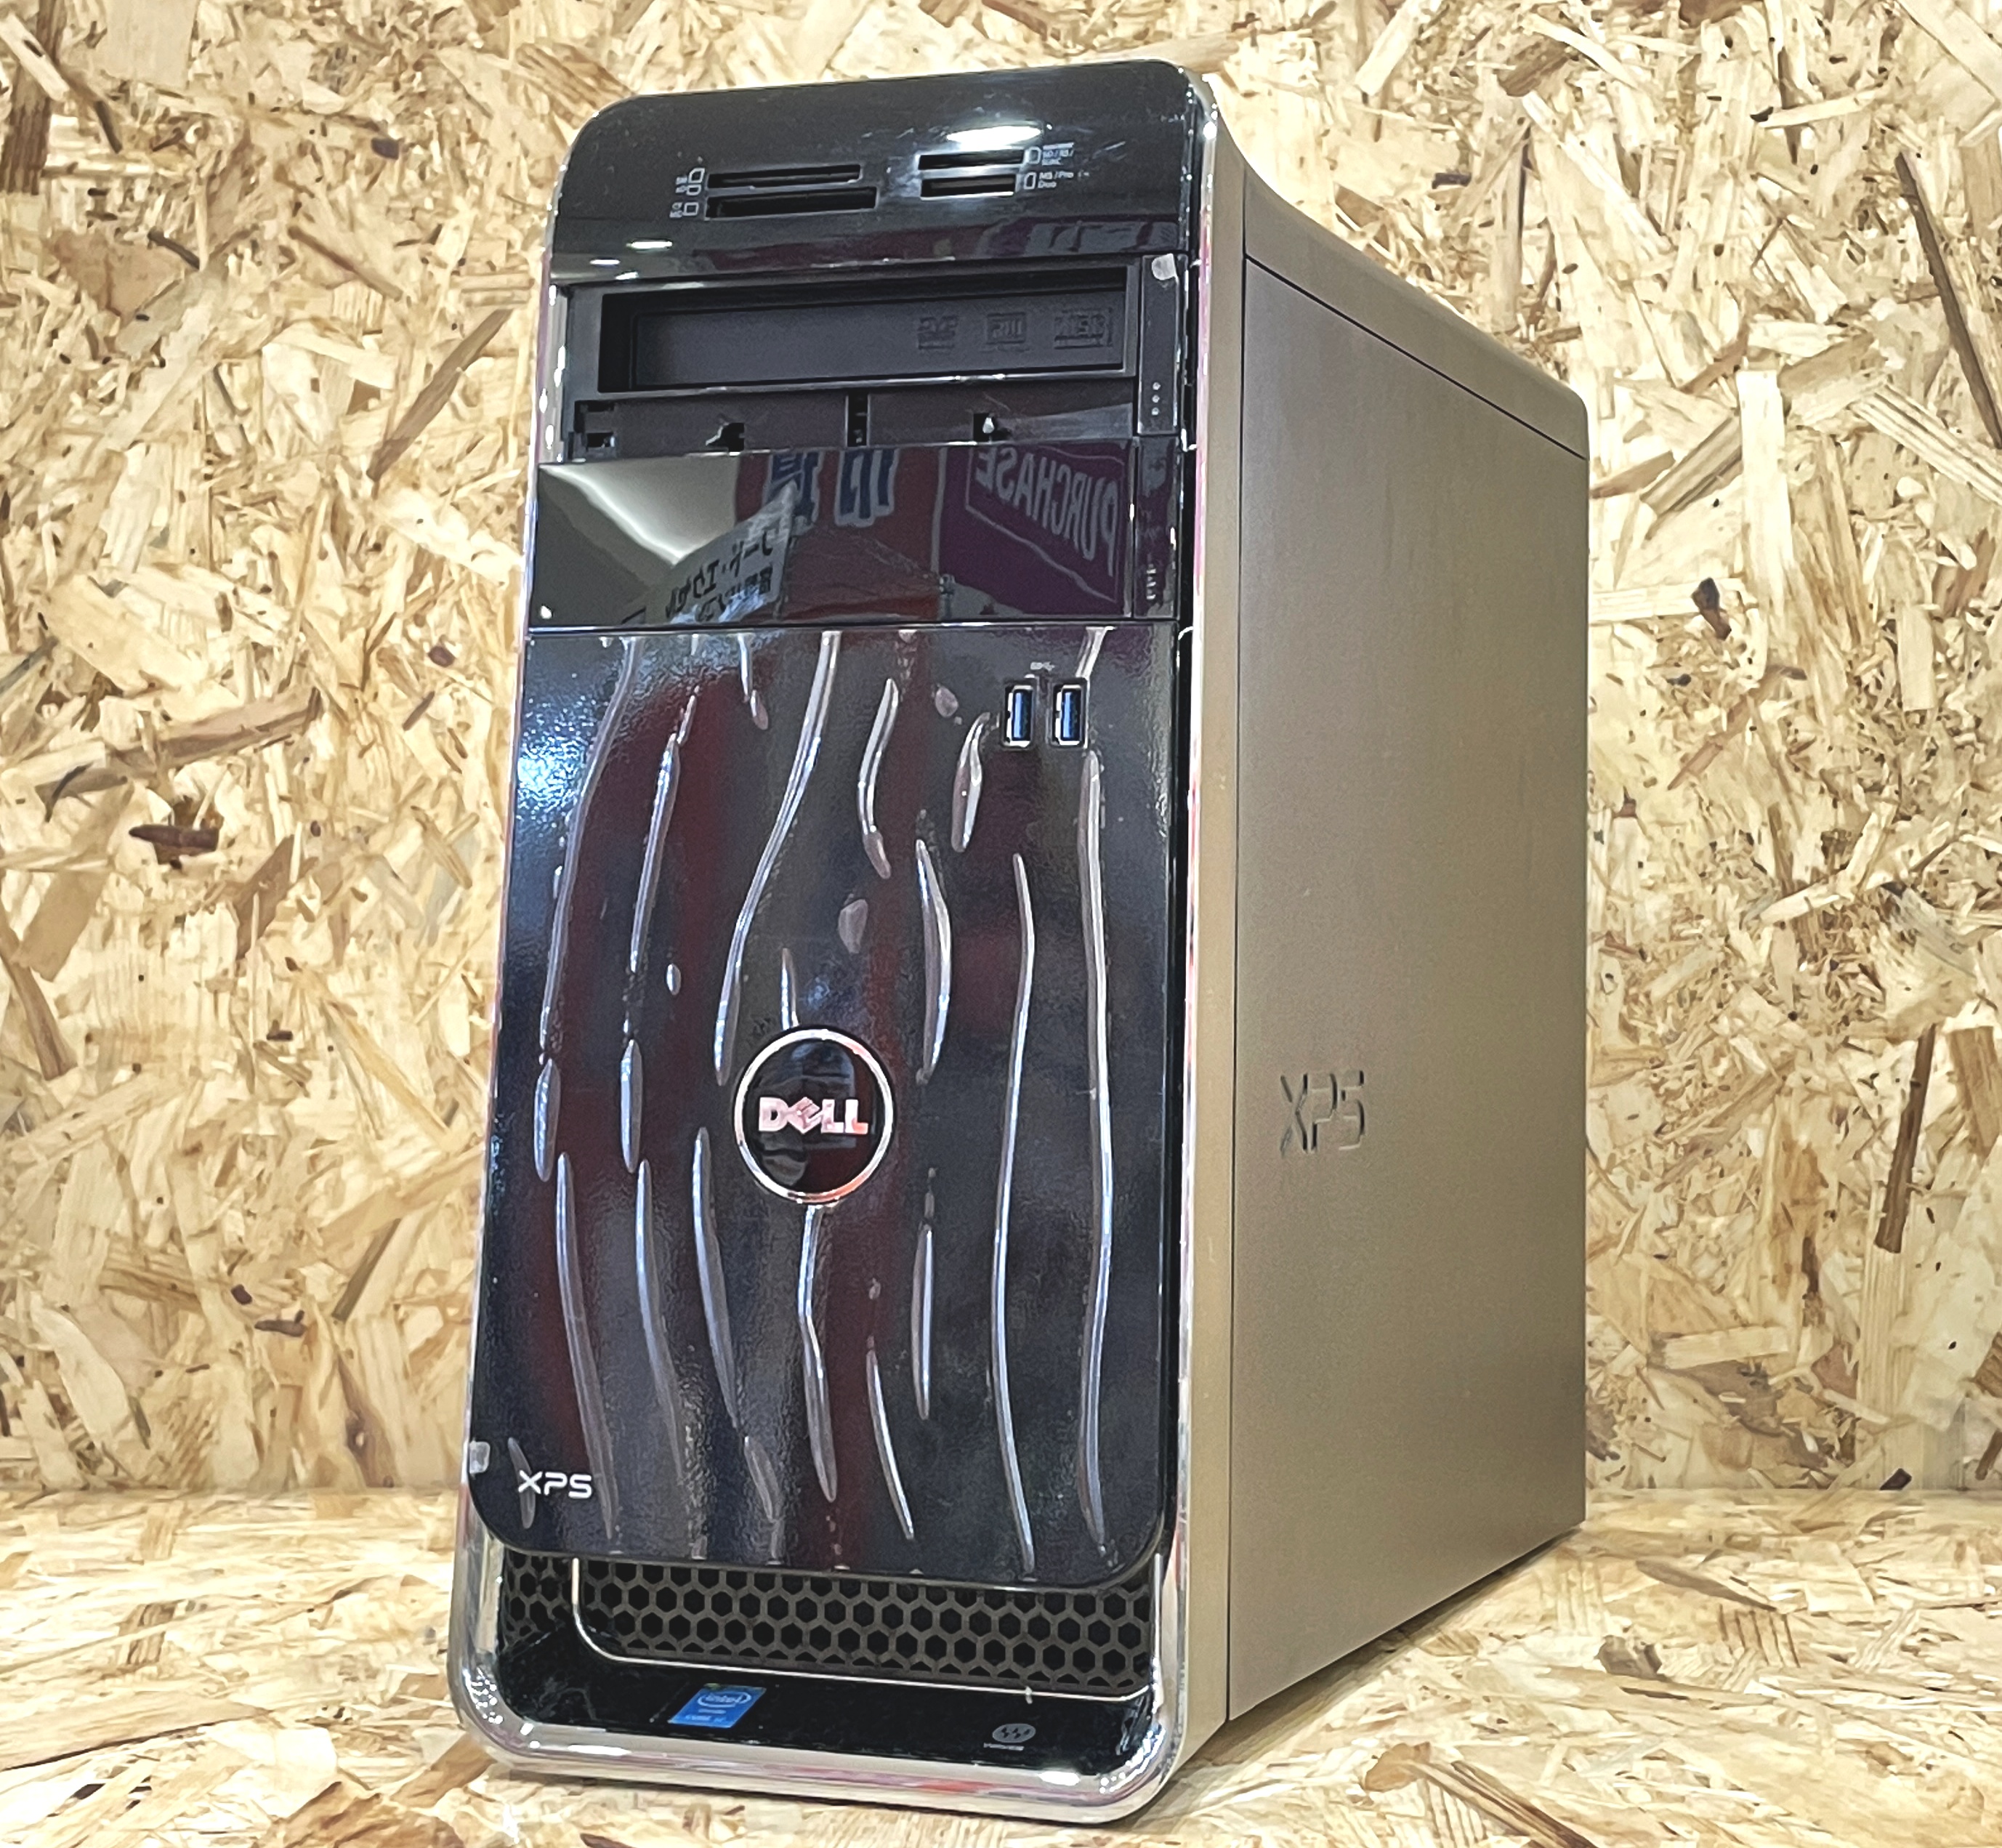 DELL XPS 8700 Series CPU:Corei7 4790 3.06GHz / 16GB / SSD:240GB+ ...